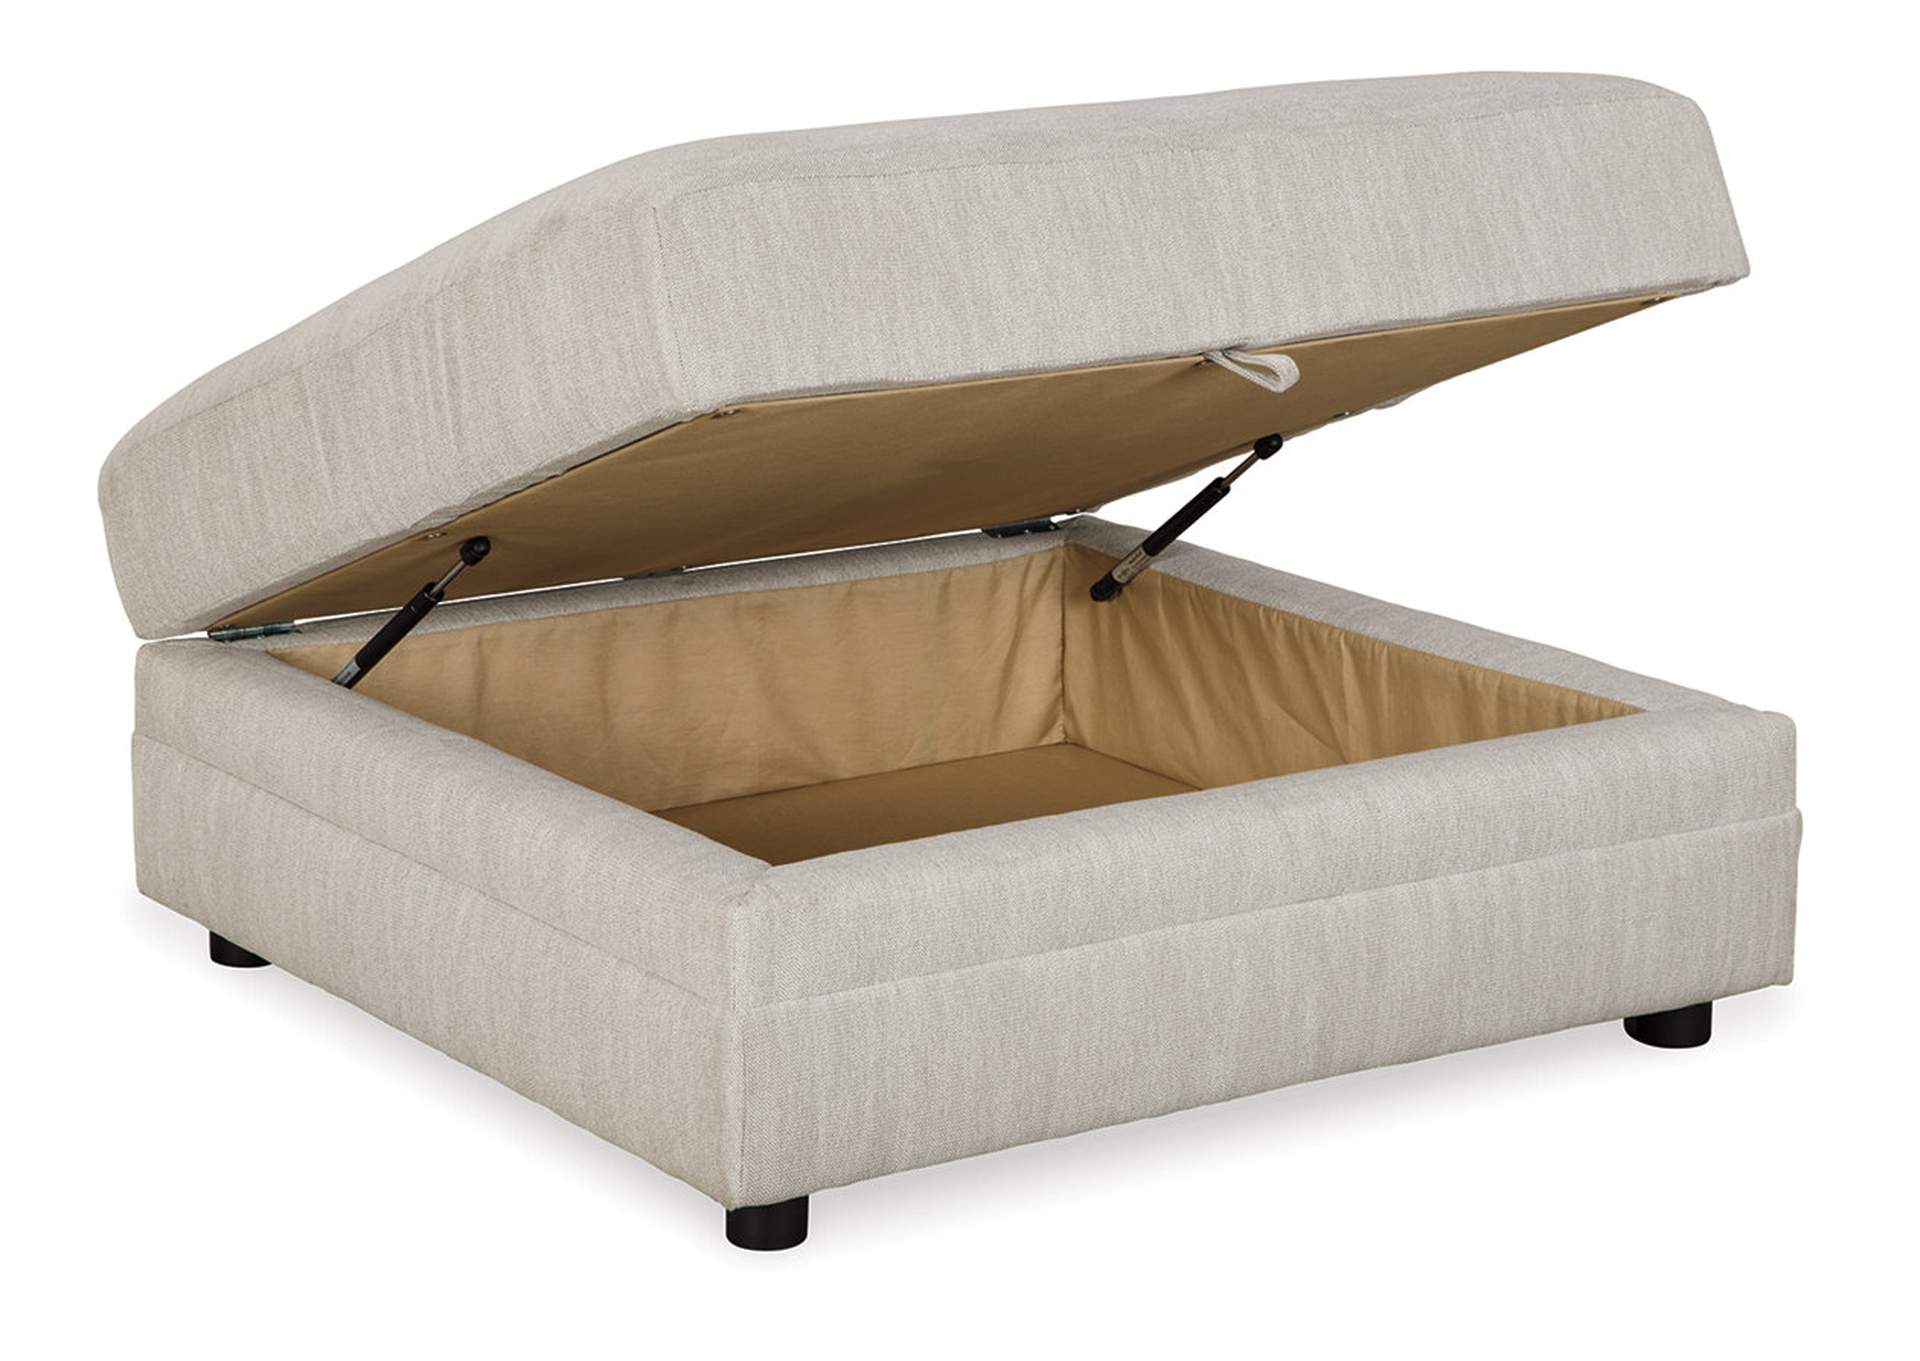 Neira Ottoman With Storage,Direct To Consumer Express